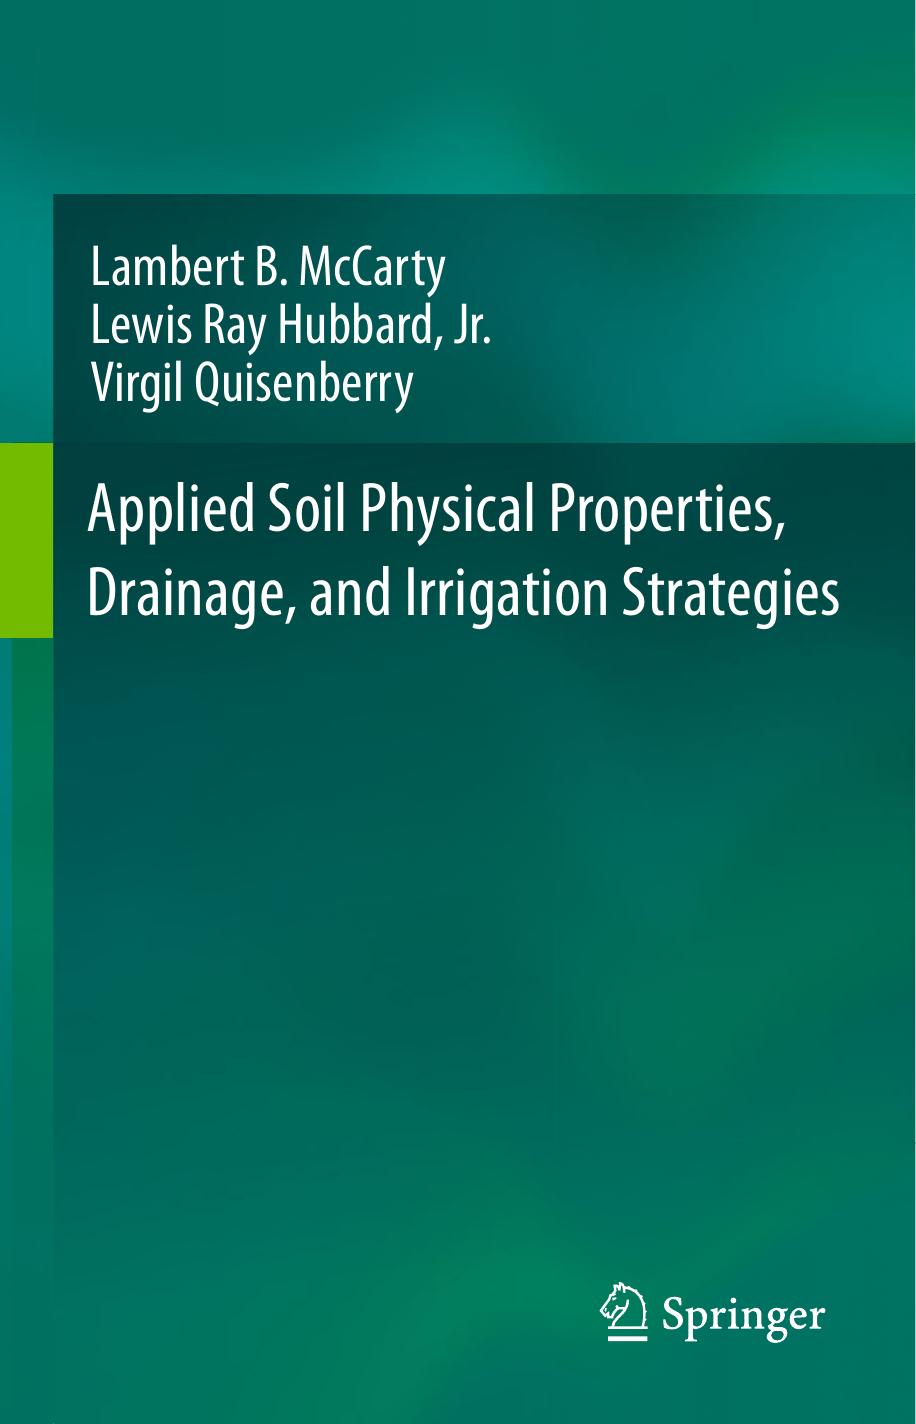 Applied Soil Physical Properties, Drainage, and Irrigation Strategies. 2016